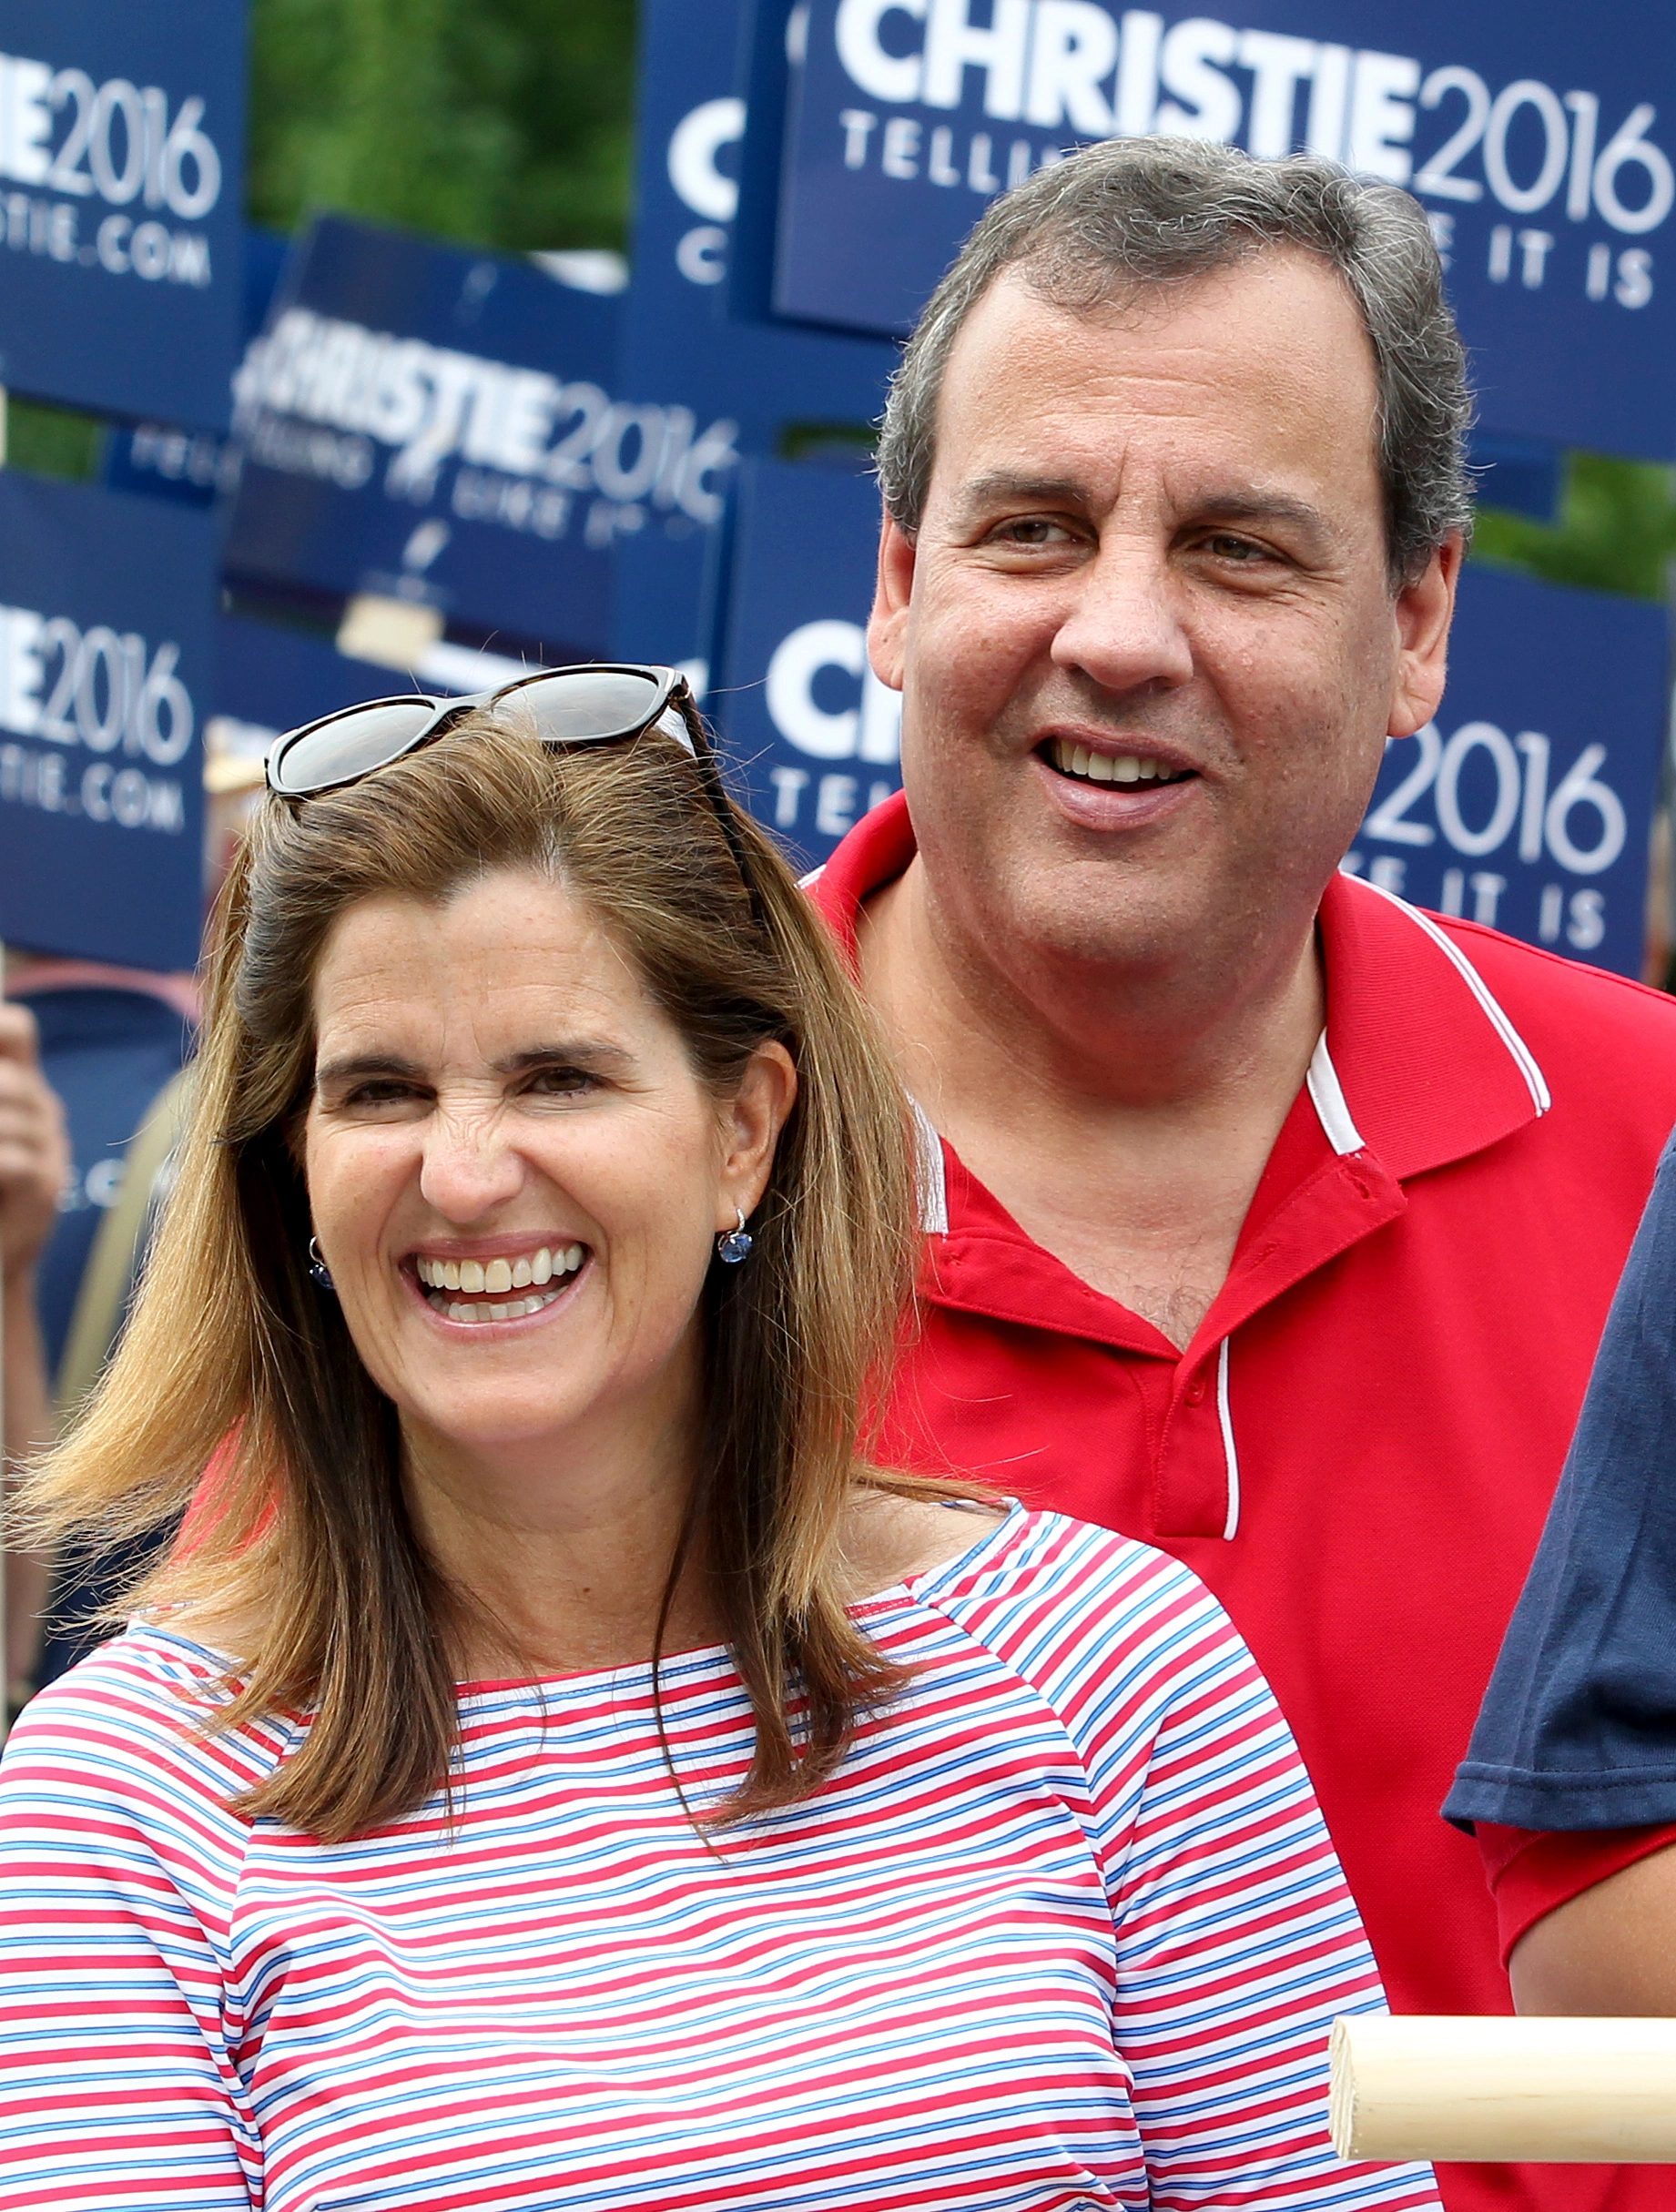 Chris Christie wife is Mary Pat Christie